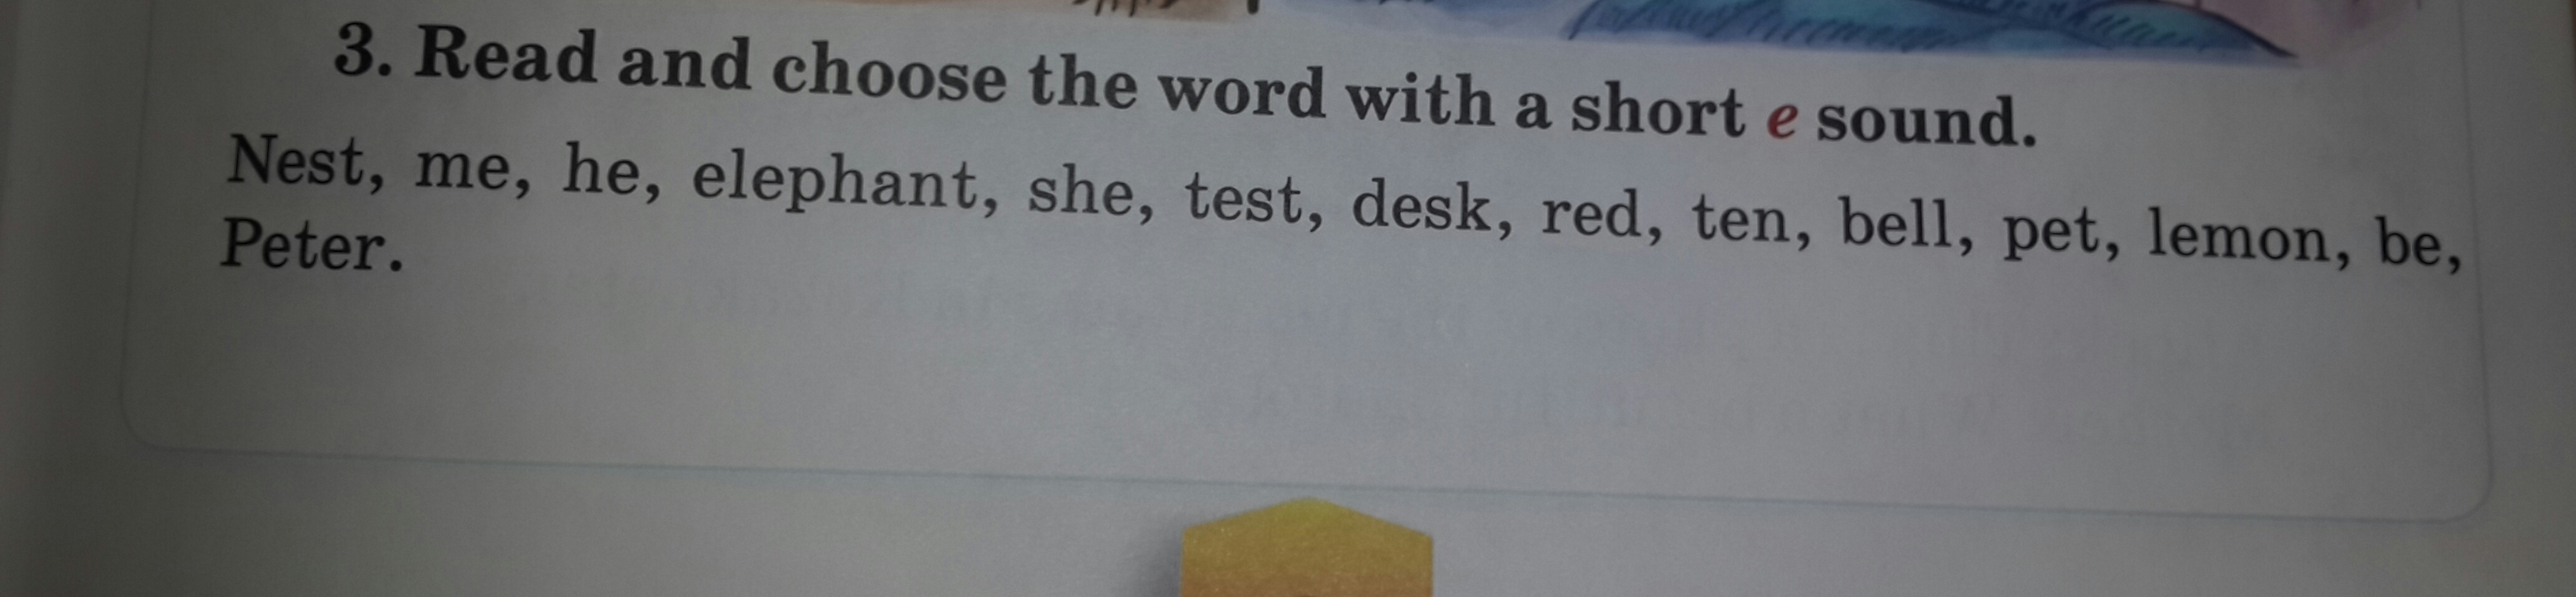 Read and choose the word a short e sound?